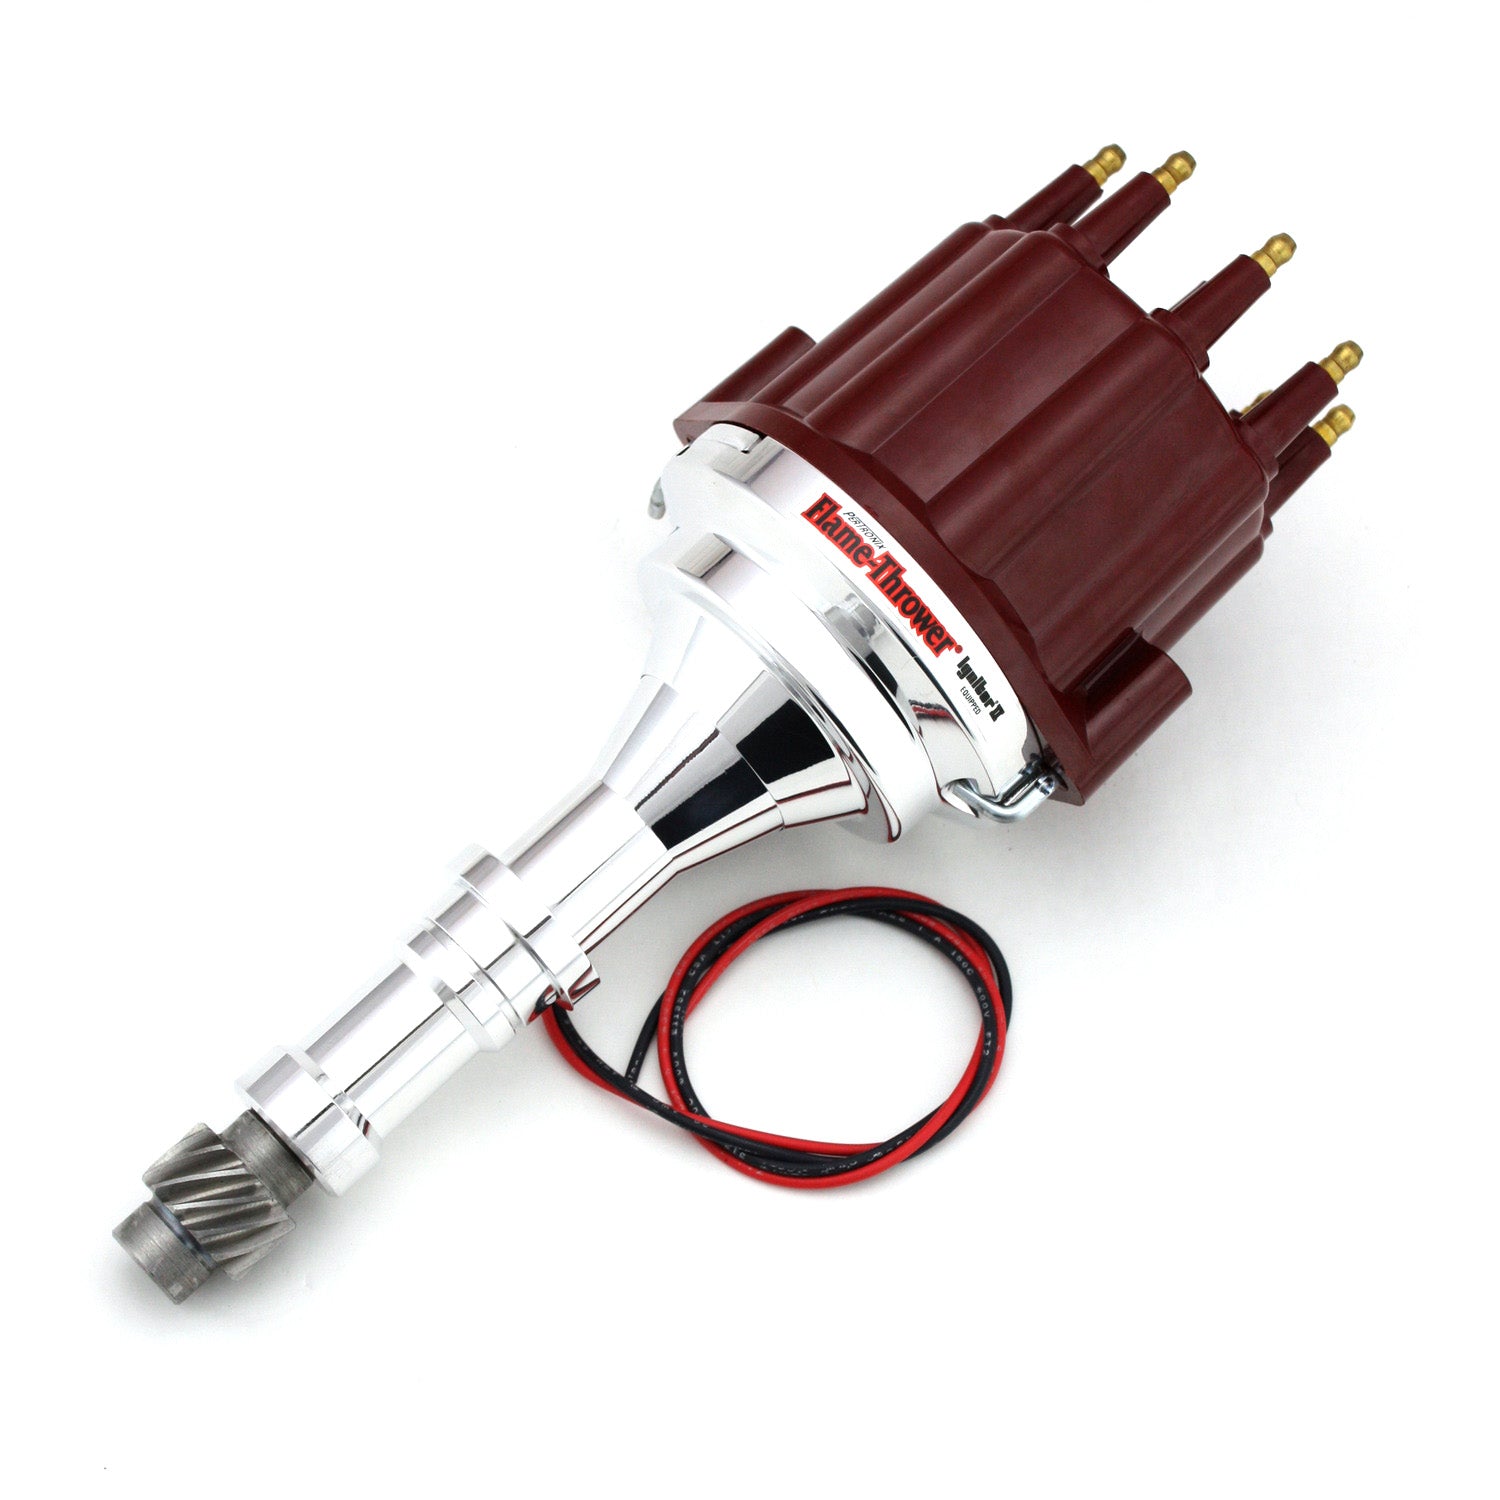 PerTronix D150811 Flame-Thrower Electronic Distributor Billet Buick V8 Plug and Play with Ignitor II Technology Non Vacuum Advance Red Male Cap